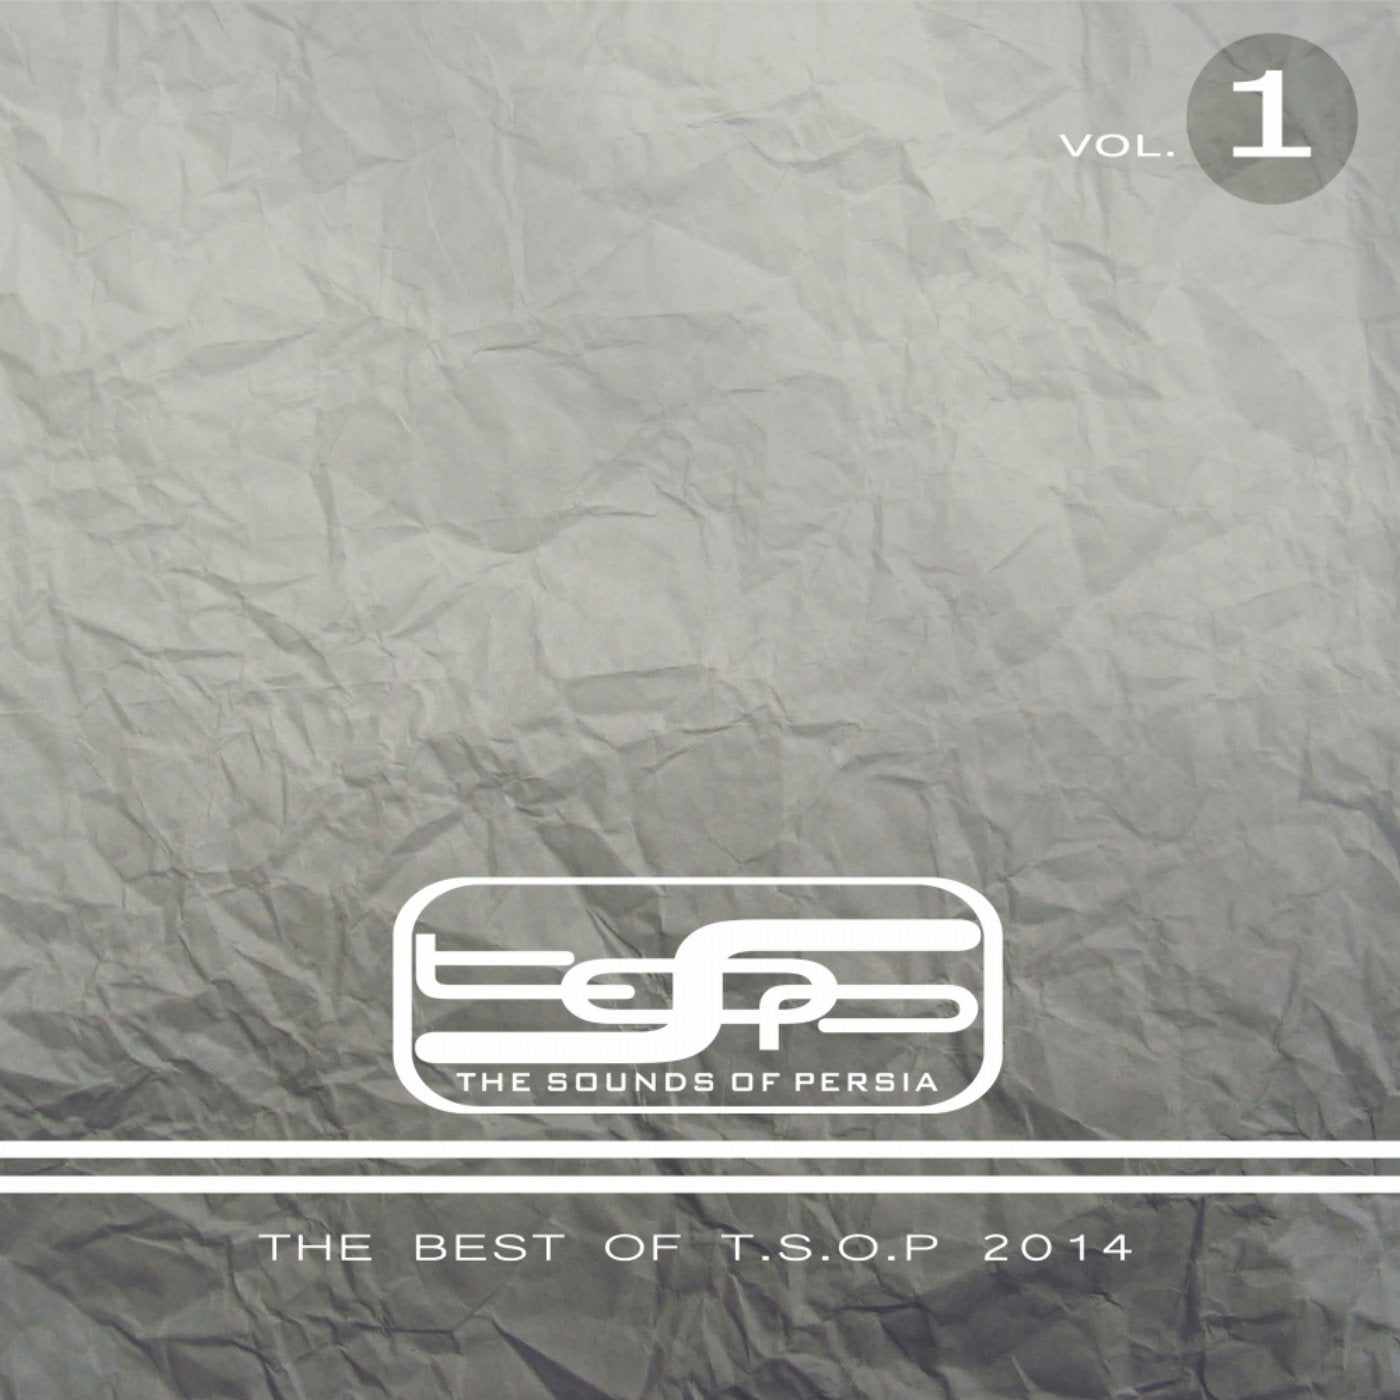 The Best of T.S.O.P 2014, Vol.1